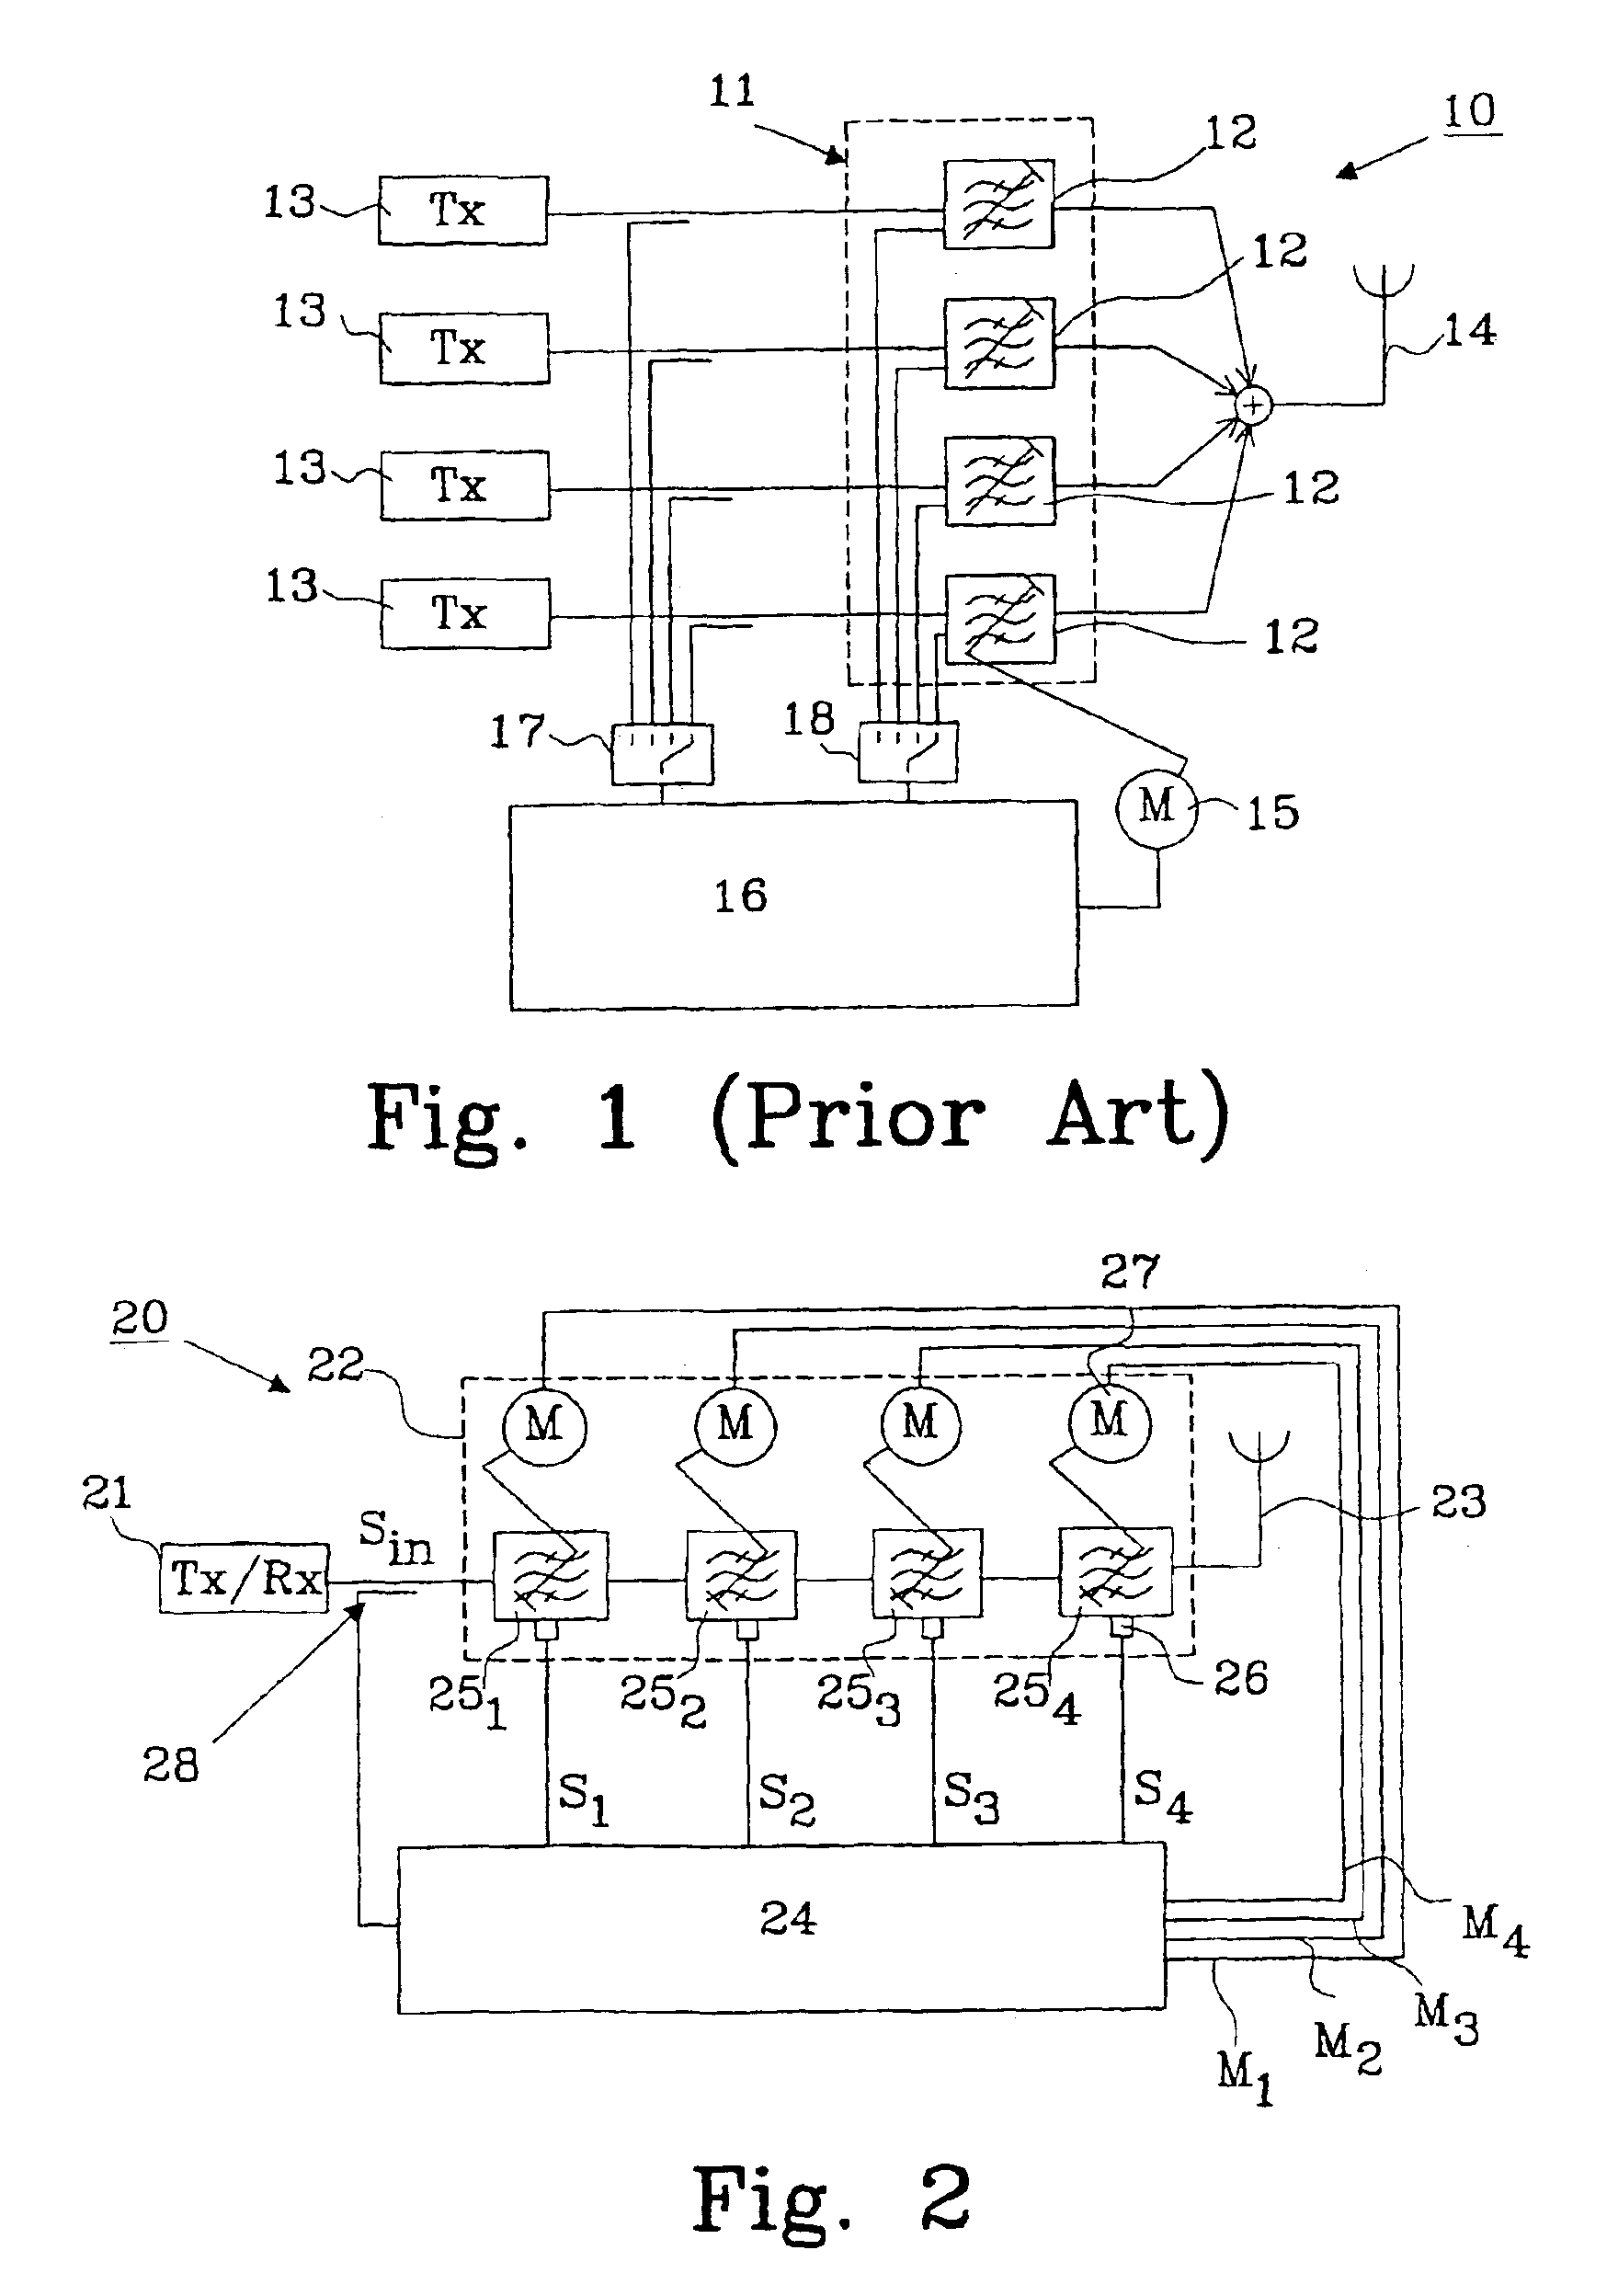 Method for tuning a radio filter, a radio filter and a system comprising such a radio filter